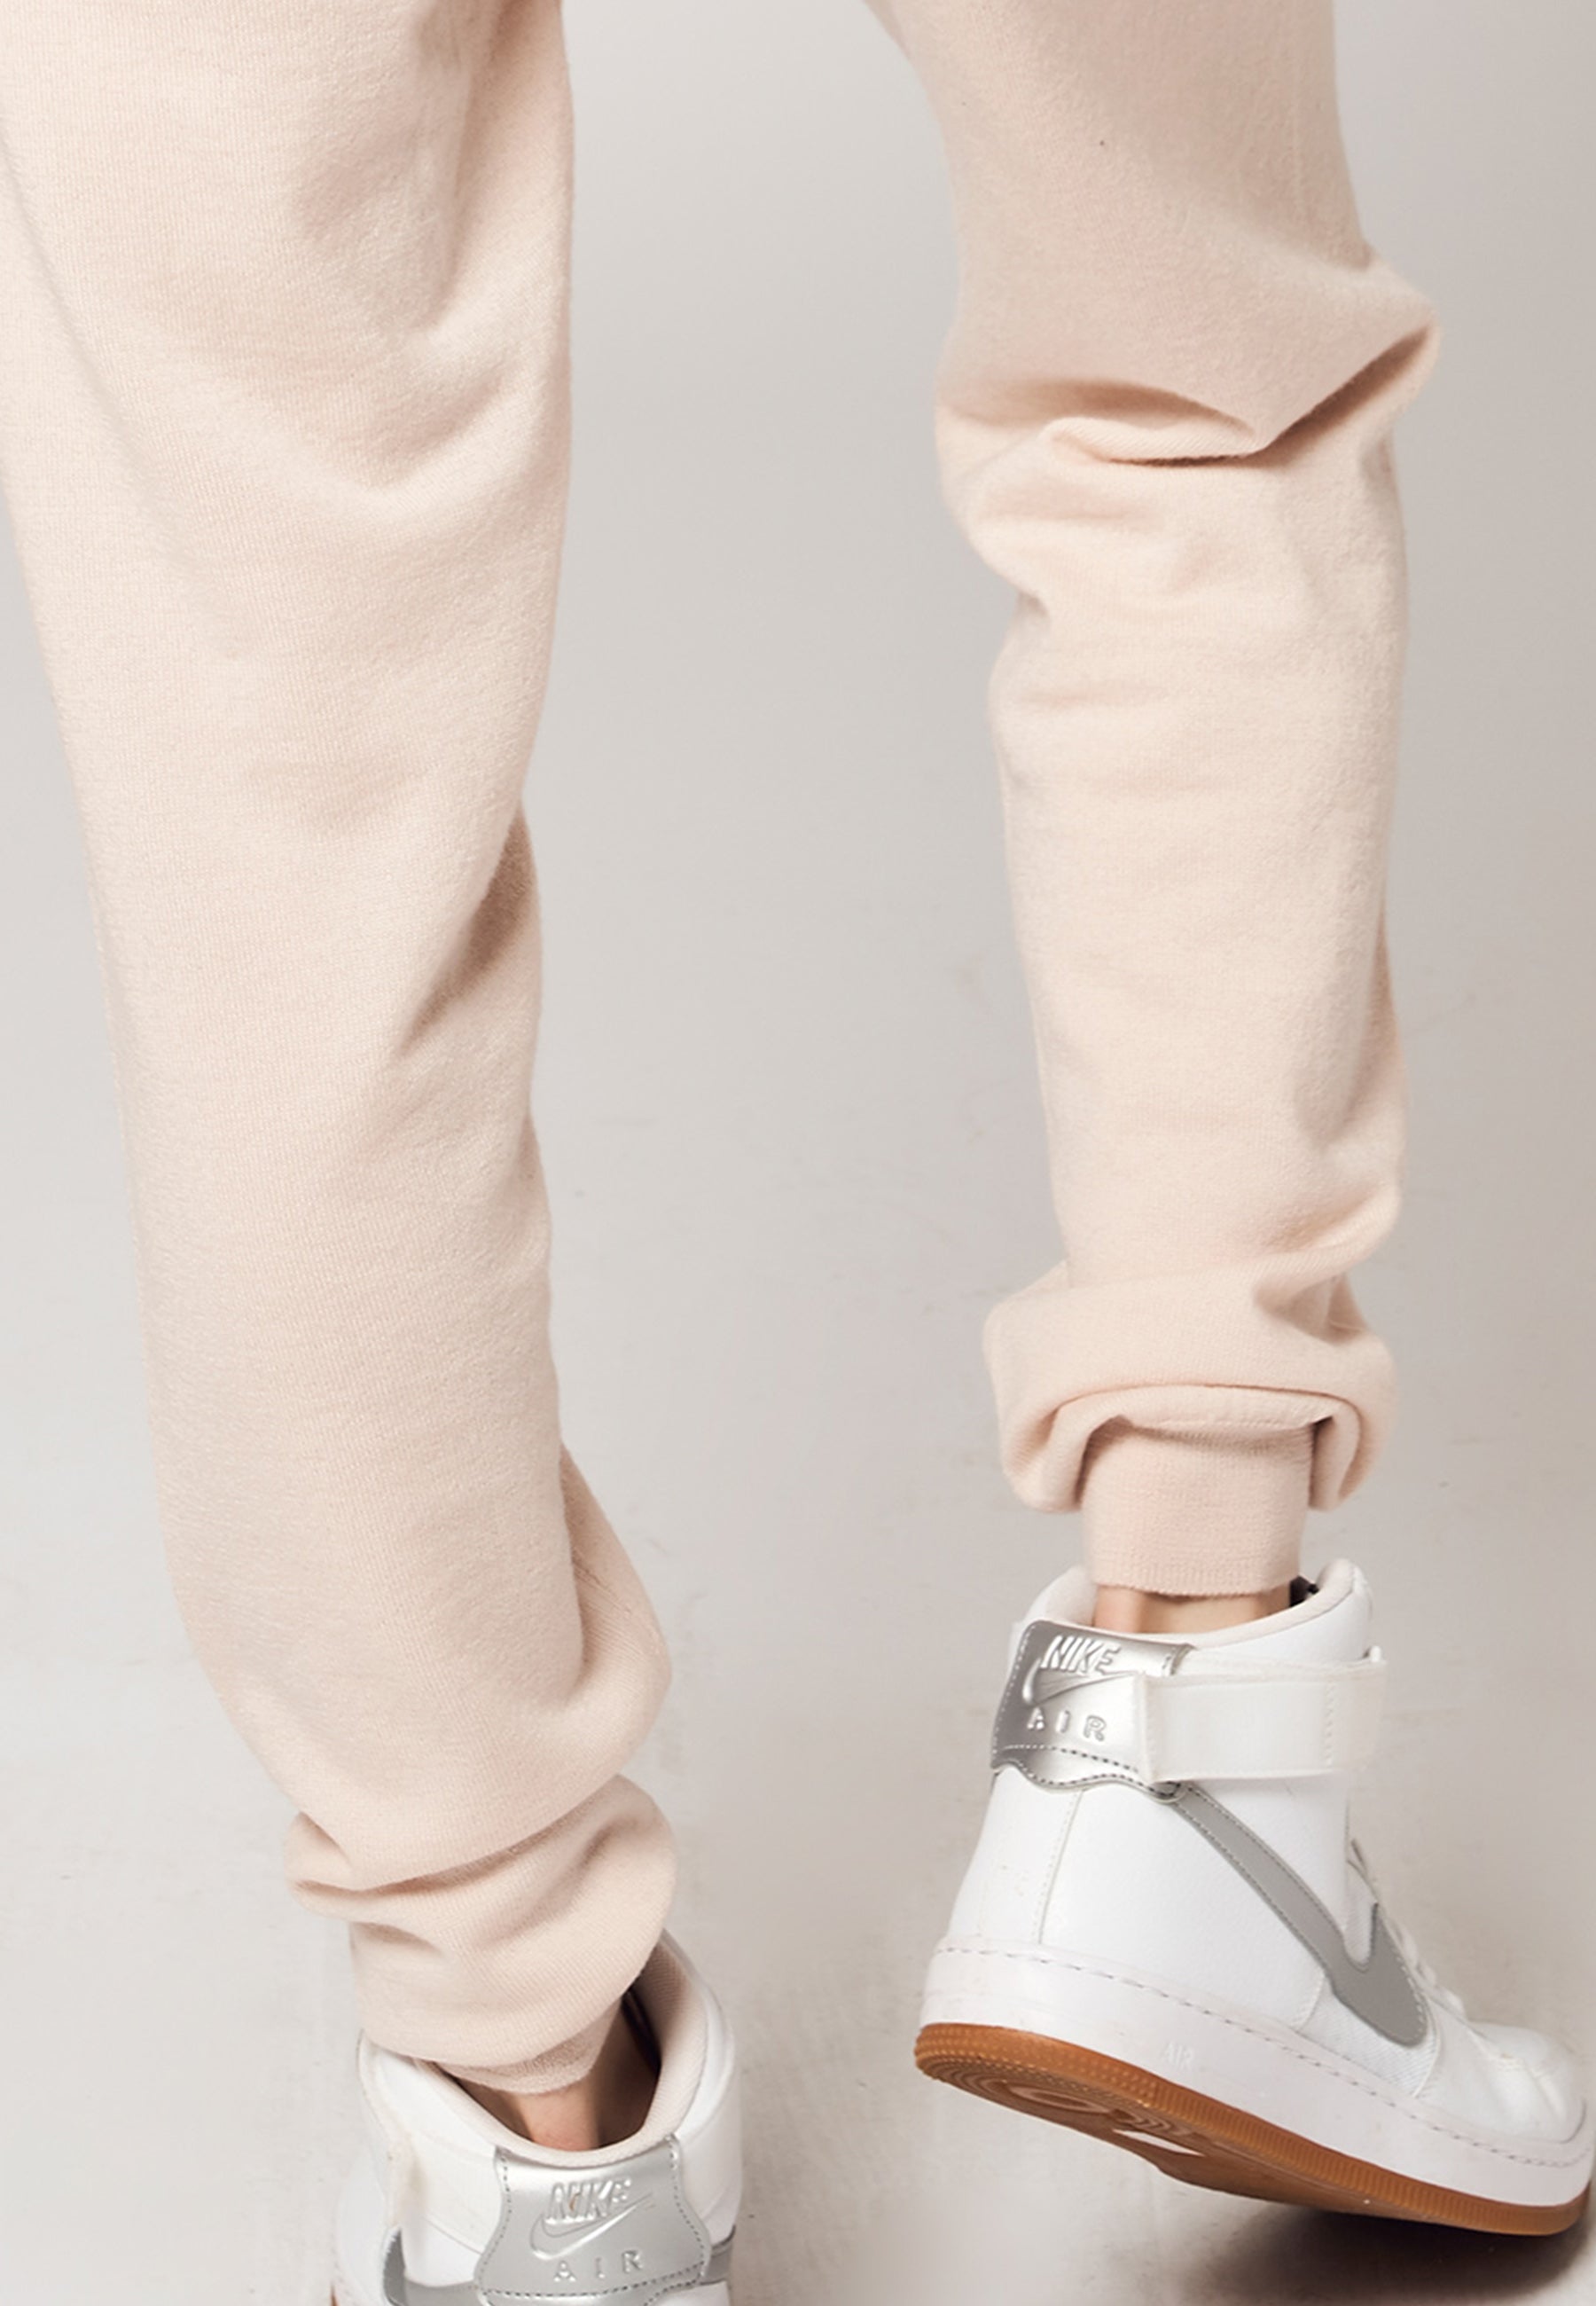 everyday-cashmere-pant